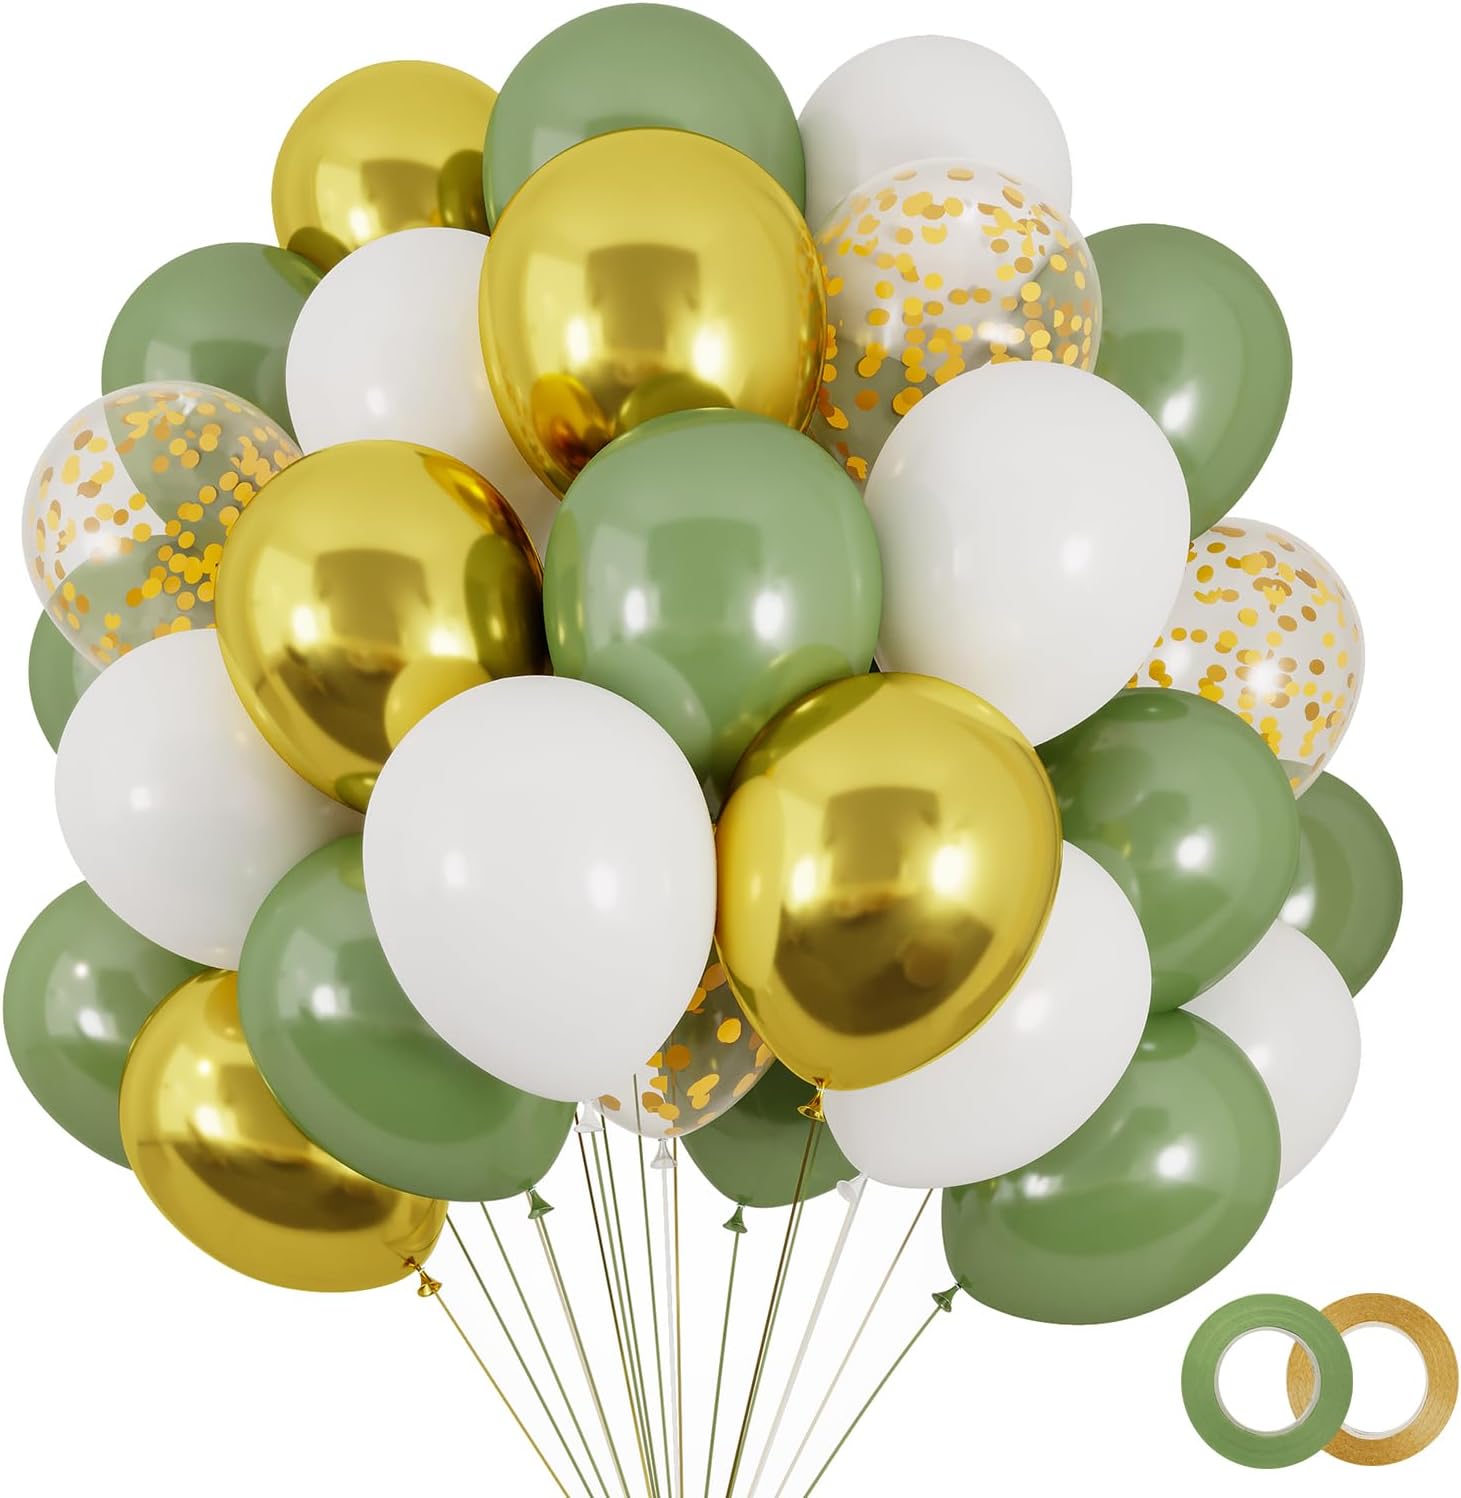 Sage Green Gold Balloons Kit 120PCS for Birthday, Wedding, Baby Shower, Graduation Party Decorations